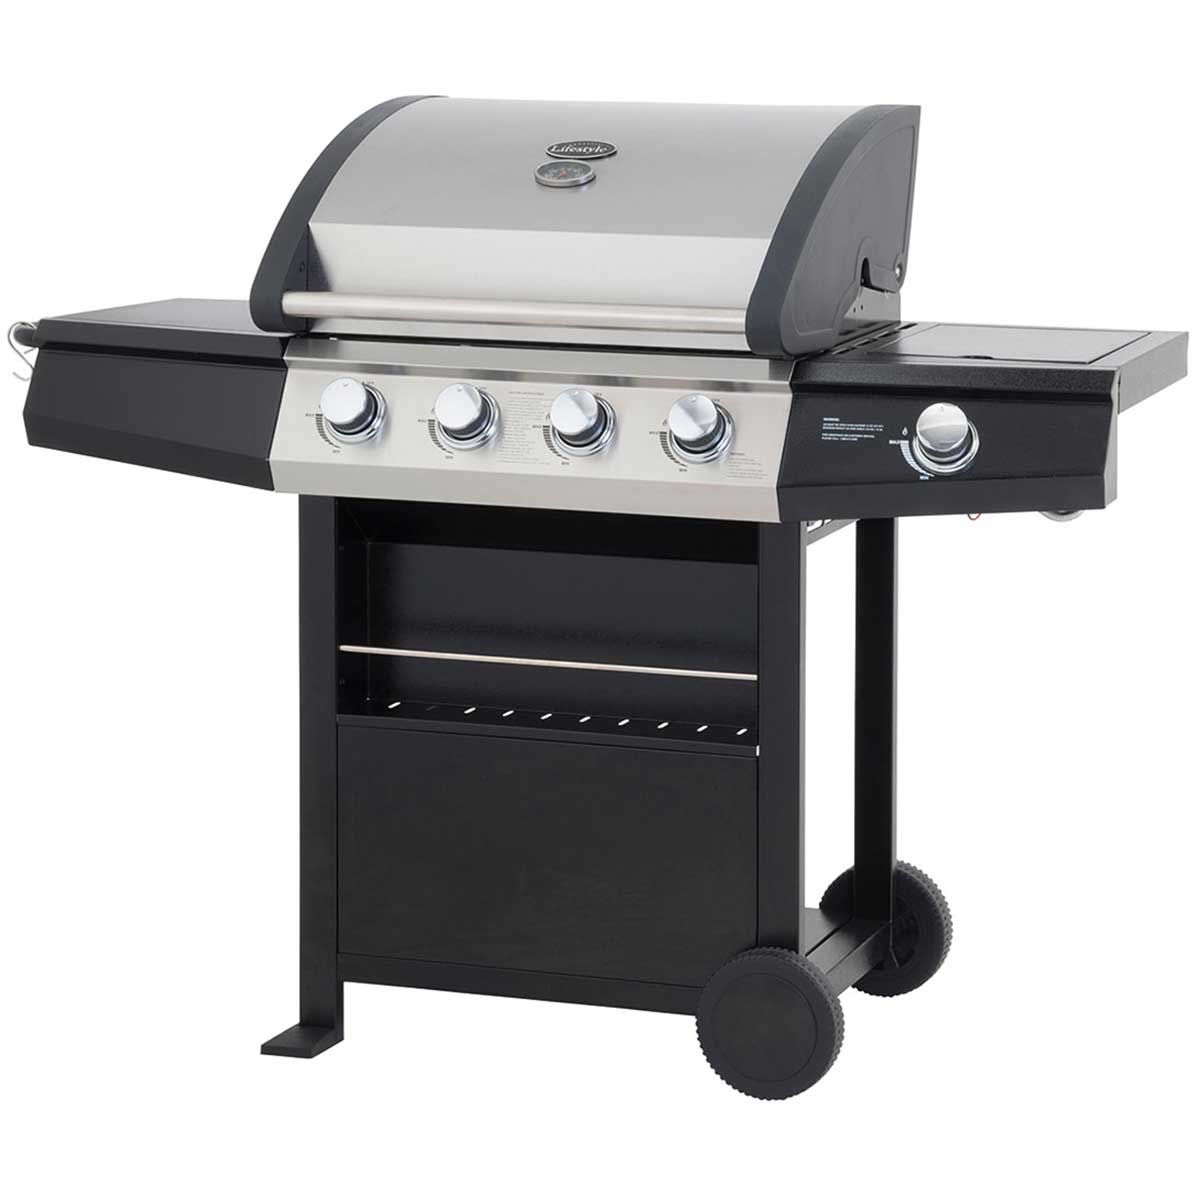 Lifestyle Grenada 4+1 Burner Gas Barbecue Grill - Glowing Flames